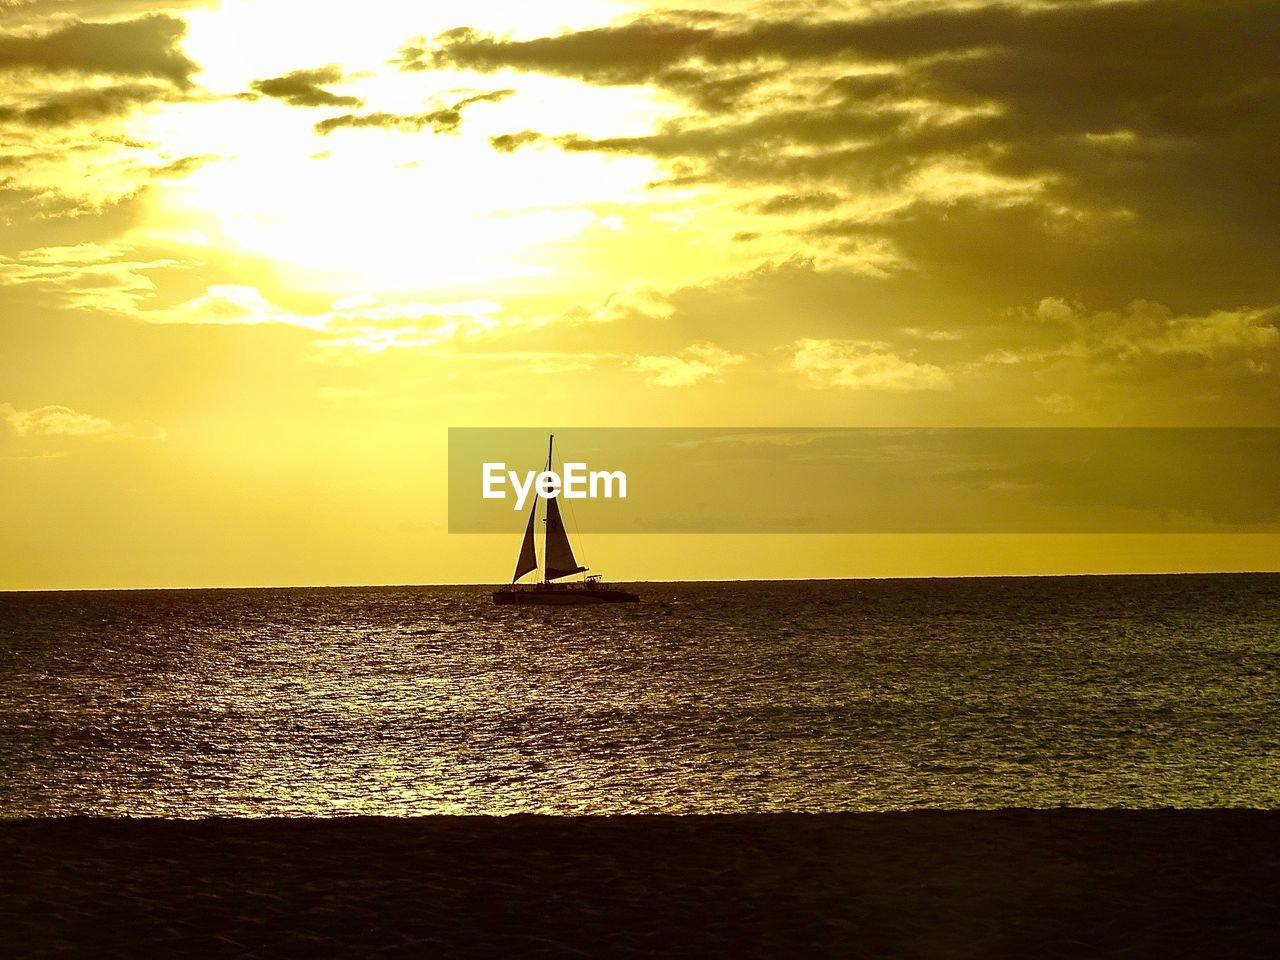 SILHOUETTE SAILBOAT IN SEA AGAINST SUNSET SKY